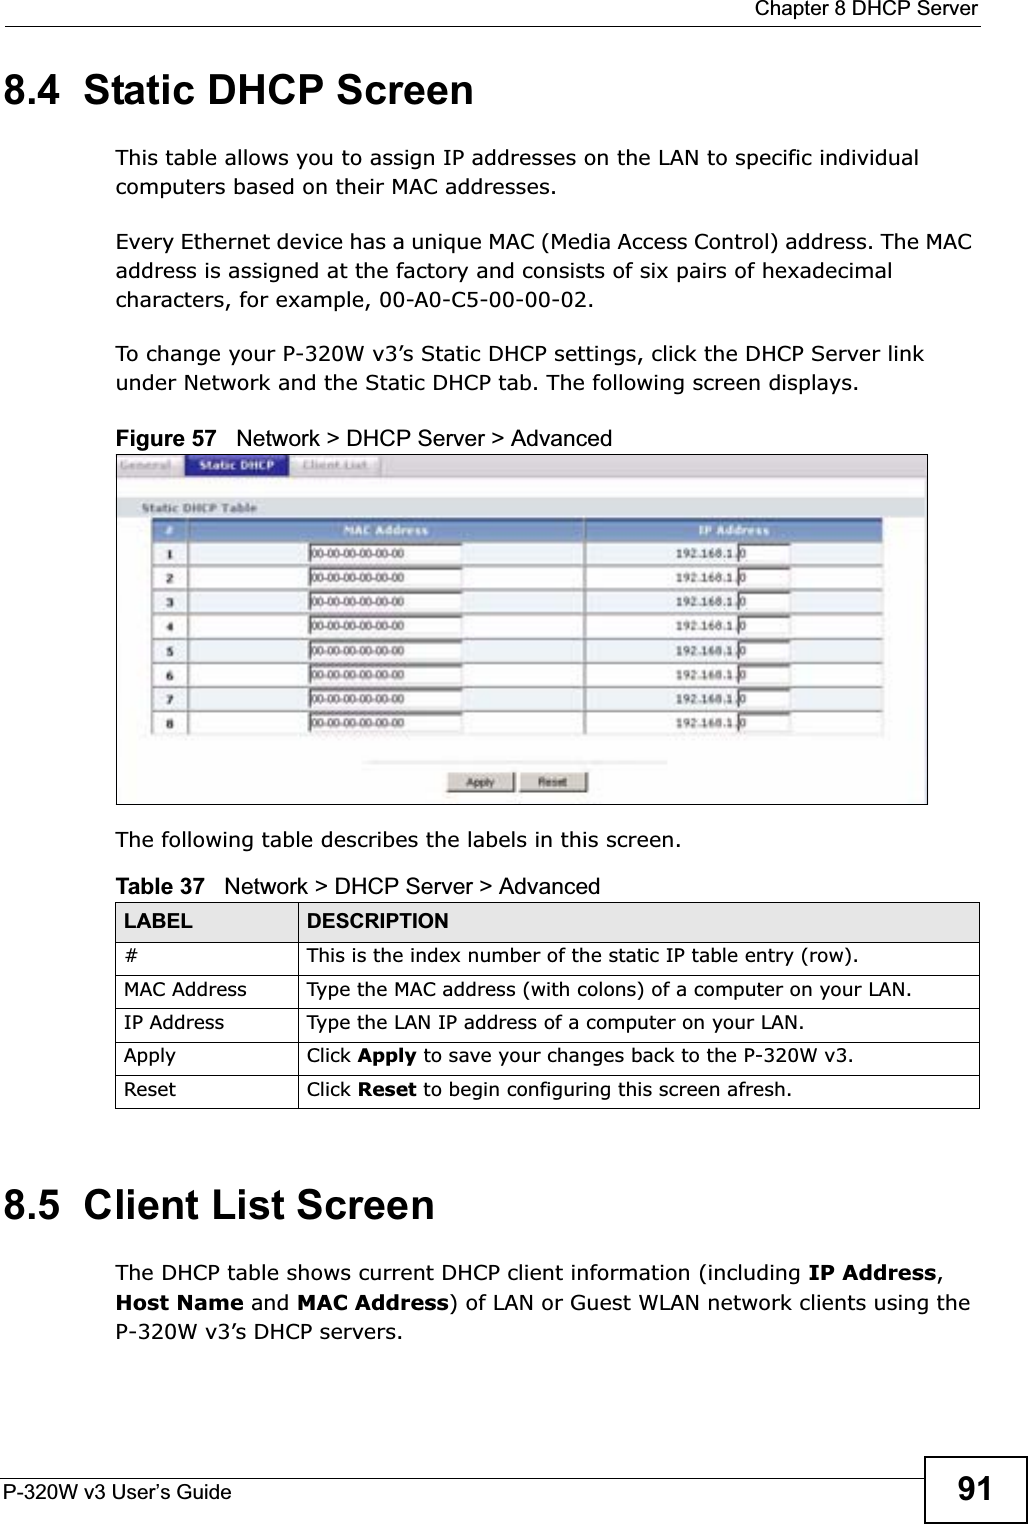  Chapter 8 DHCP ServerP-320W v3 User’s Guide 918.4  Static DHCP Screen    This table allows you to assign IP addresses on the LAN to specific individual computers based on their MAC addresses.Every Ethernet device has a unique MAC (Media Access Control) address. The MAC address is assigned at the factory and consists of six pairs of hexadecimal characters, for example, 00-A0-C5-00-00-02.To change your P-320W v3’s Static DHCP settings, click the DHCP Server link under Network and the Static DHCP tab. The following screen displays.Figure 57   Network &gt; DHCP Server &gt; Advanced The following table describes the labels in this screen.8.5  Client List ScreenThe DHCP table shows current DHCP client information (including IP Address,Host Name and MAC Address) of LAN or Guest WLAN network clients using the P-320W v3’s DHCP servers.Table 37   Network &gt; DHCP Server &gt; AdvancedLABEL DESCRIPTION# This is the index number of the static IP table entry (row).MAC Address Type the MAC address (with colons) of a computer on your LAN.IP Address Type the LAN IP address of a computer on your LAN.Apply Click Apply to save your changes back to the P-320W v3.Reset Click Reset to begin configuring this screen afresh.